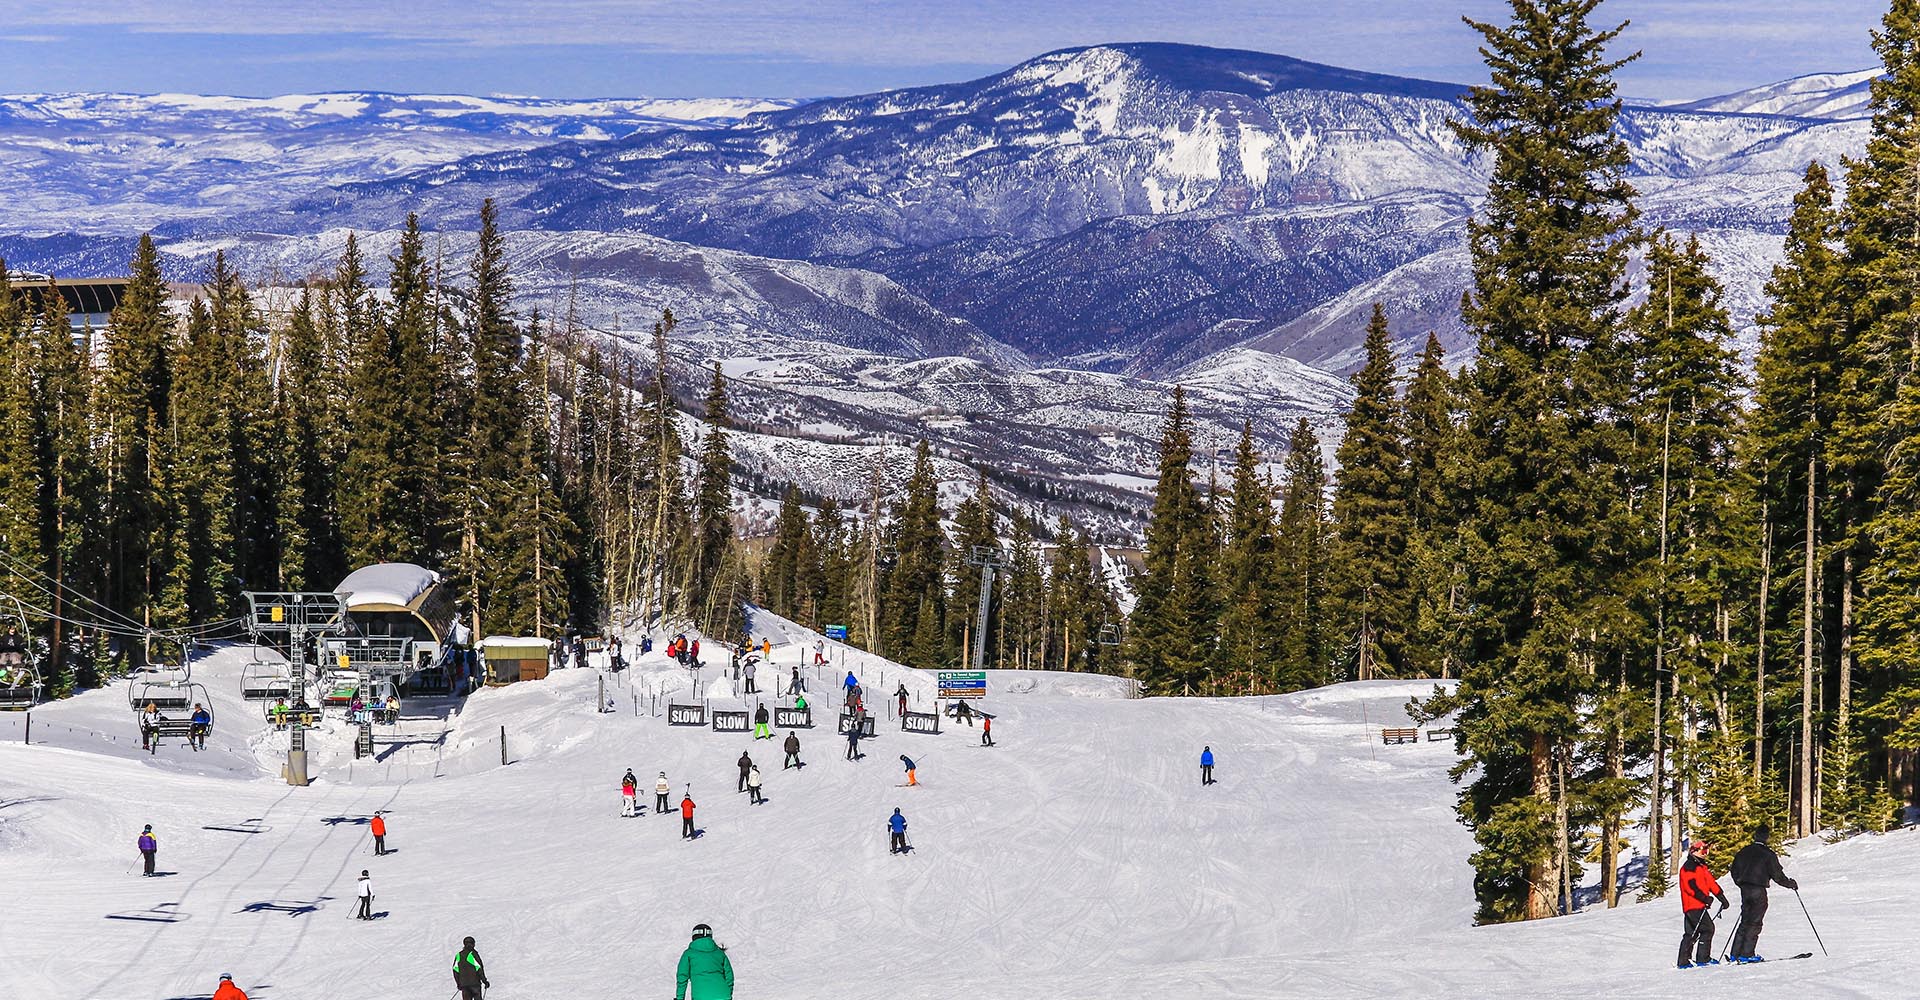 Looking down a ski slope from the top with a bunch of skiers and well-worn trails. A scenic vista is the backdrop, truly purple mountain majesty yawning out panoramically, evoking a sense of wonder and awe.